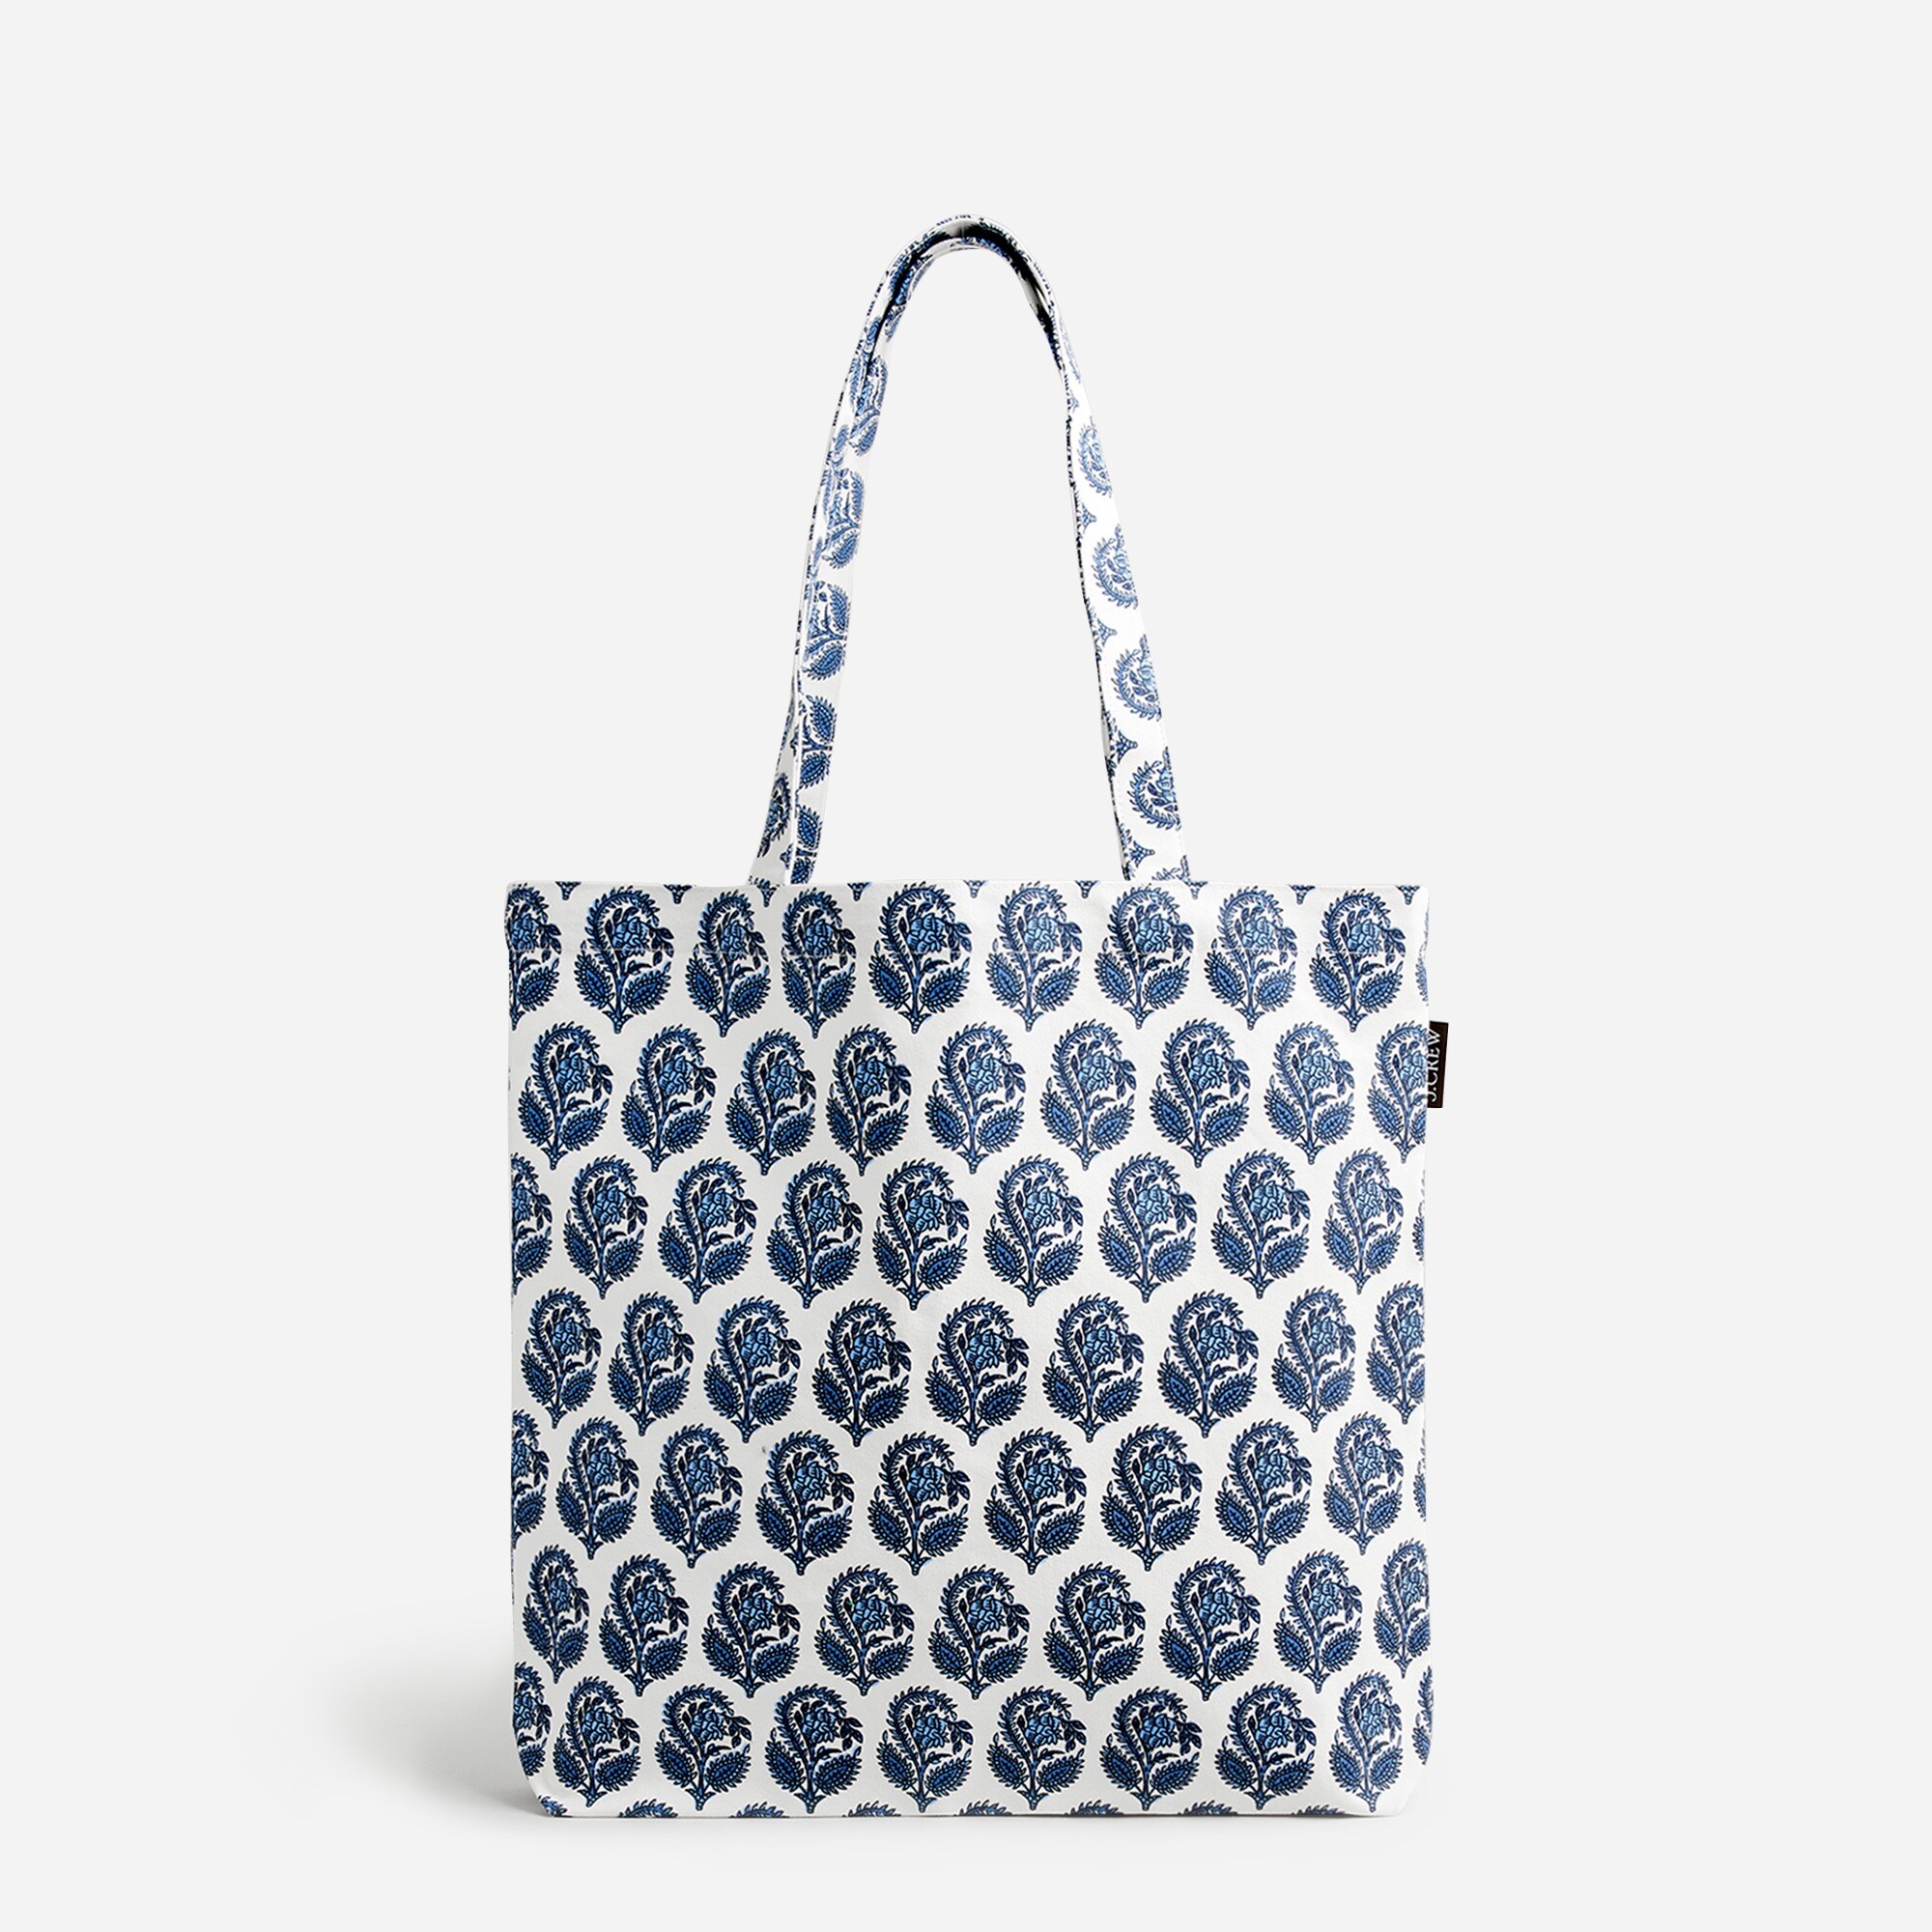  Printed reusable everyday tote